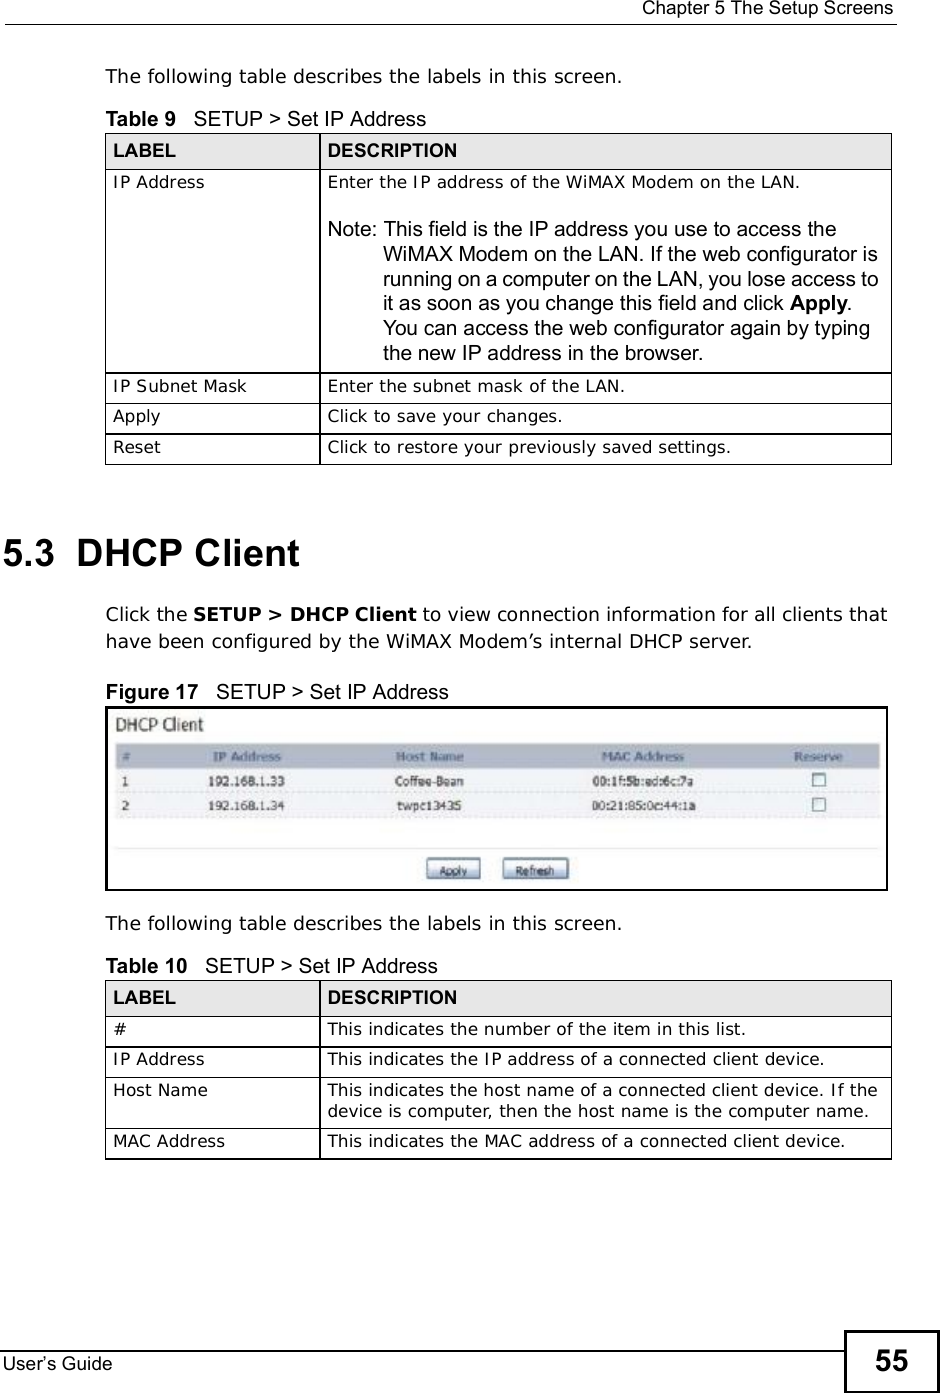  Chapter 5The Setup ScreensUser s Guide 55The following table describes the labels in this screen.  5.3  DHCP ClientClick the SETUP &gt; DHCP Client to view connection information for all clients that have been configured by the WiMAX Modem’s internal DHCP server.Figure 17   SETUP &gt; Set IP AddressThe following table describes the labels in this screen.  Table 9   SETUP &gt; Set IP AddressLABEL DESCRIPTIONIP Address Enter the IP address of the WiMAX Modem on the LAN.Note: This field is the IP address you use to access the WiMAX Modem on the LAN. If the web configurator is running on a computer on the LAN, you lose access to it as soon as you change this field and click Apply. You can access the web configurator again by typing the new IP address in the browser.IP Subnet Mask Enter the subnet mask of the LAN.Apply Click to save your changes.Reset Click to restore your previously saved settings.Table 10   SETUP &gt; Set IP AddressLABEL DESCRIPTION#This indicates the number of the item in this list.IP Address This indicates the IP address of a connected client device.Host Name This indicates the host name of a connected client device. If the device is computer, then the host name is the computer name.MAC Address This indicates the MAC address of a connected client device.